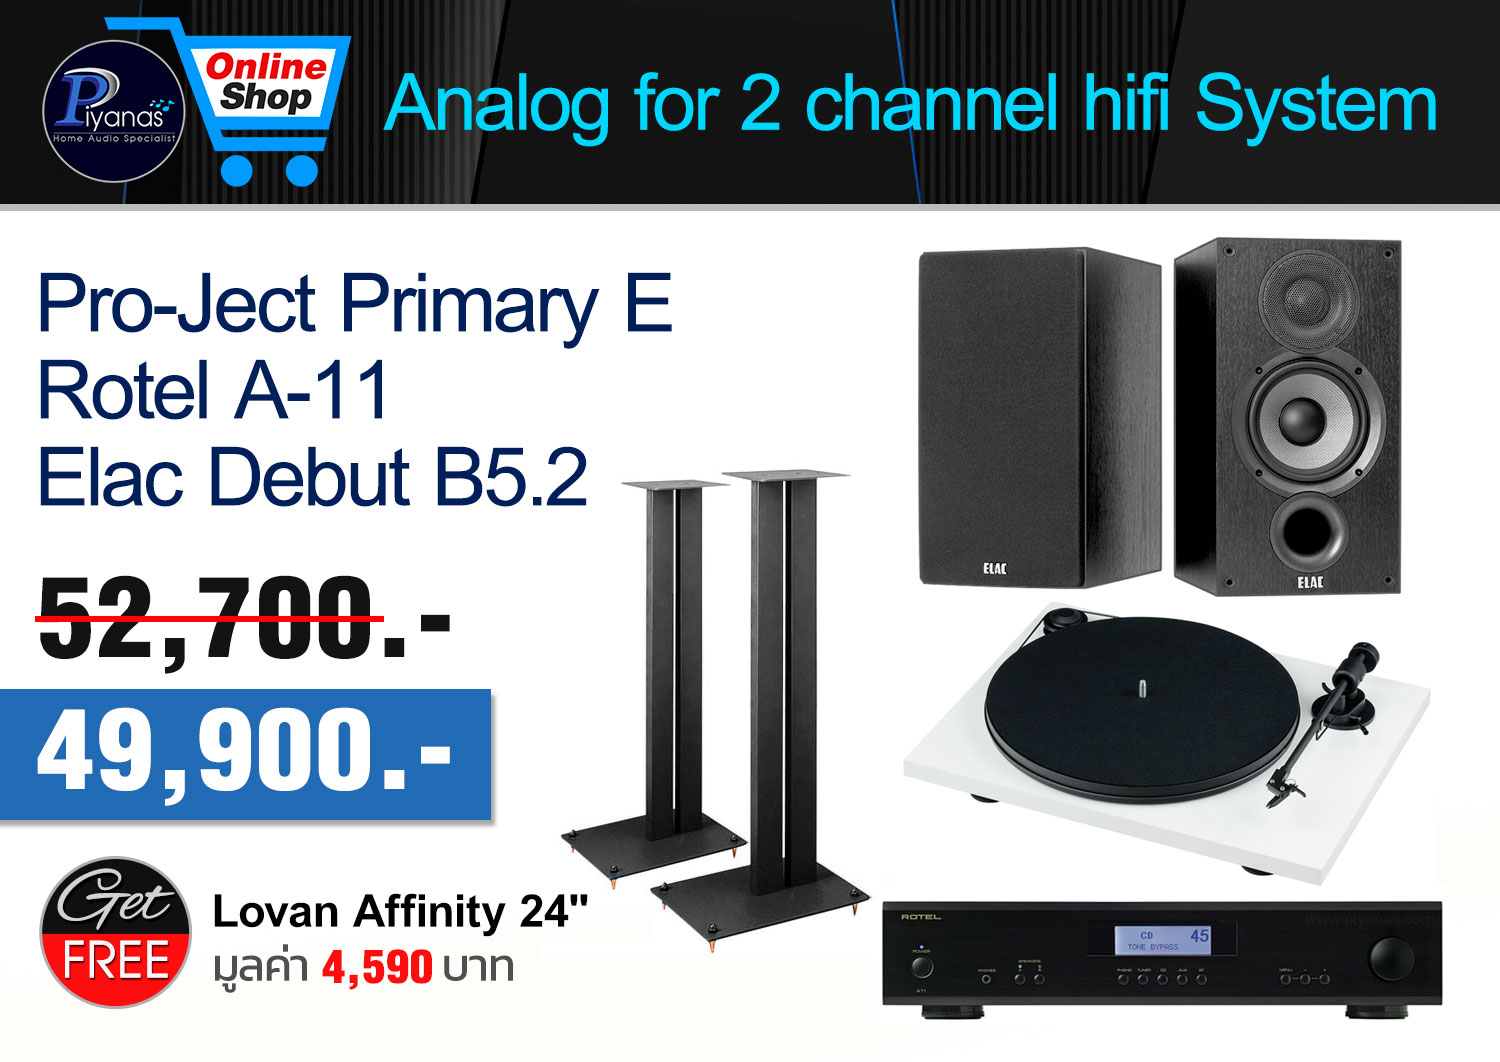 Analog for 2 channel hifi System 1